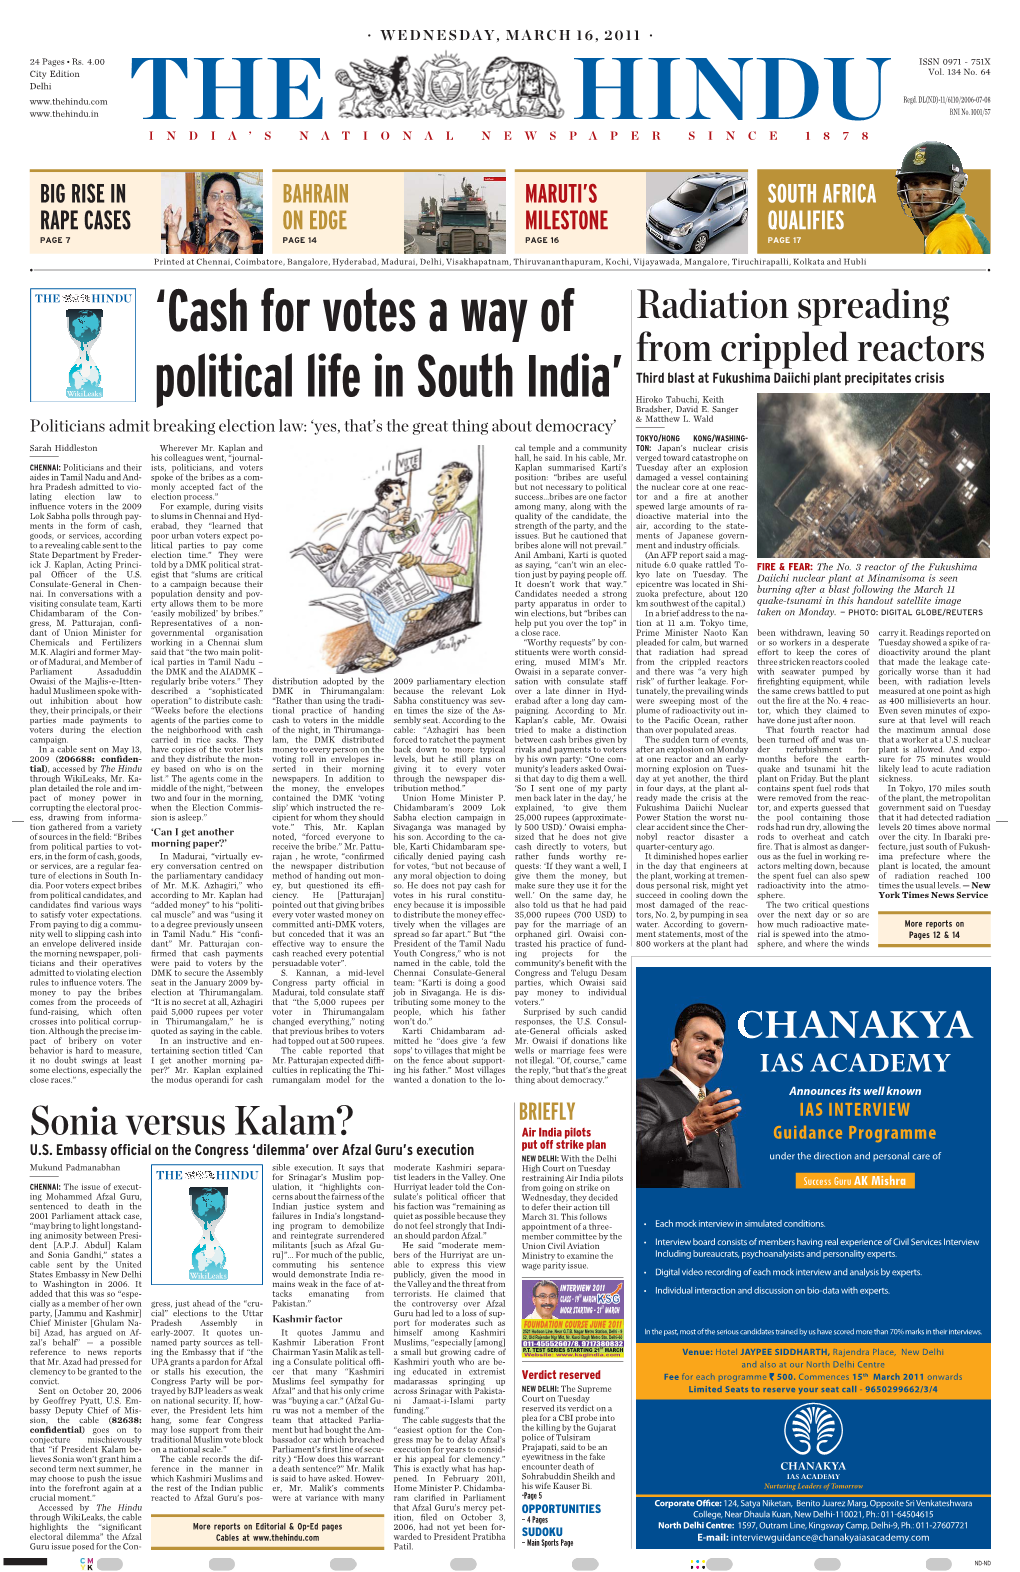 India Cables, Page 1, TH, March 16, 2011